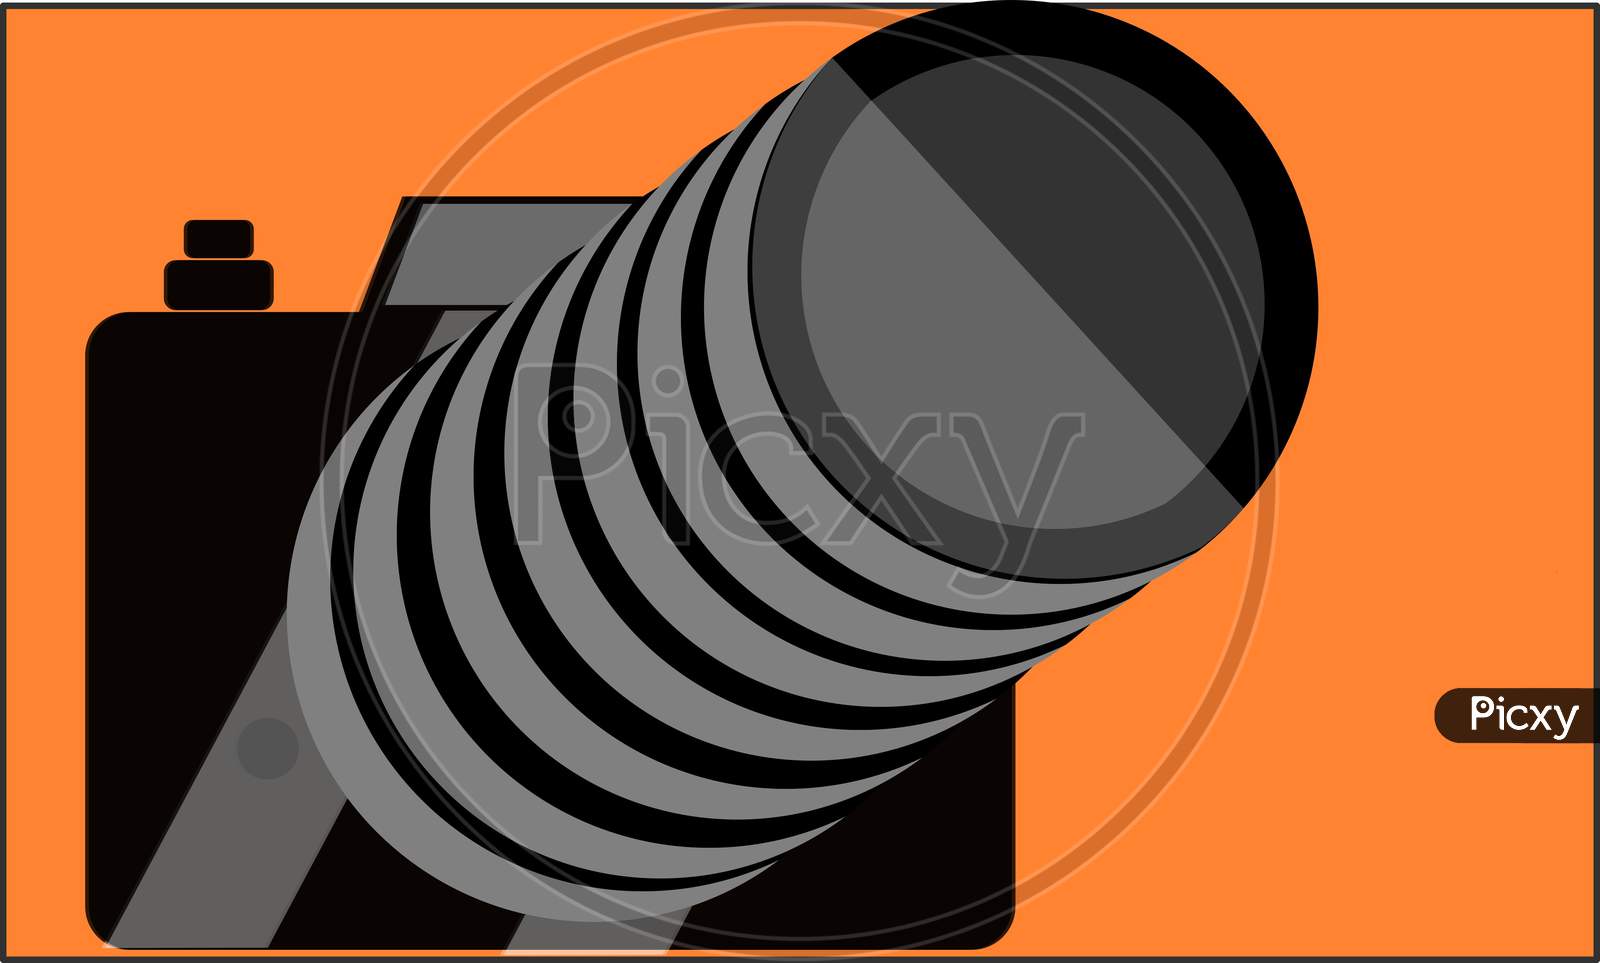 Camera with wide lenses illustration.